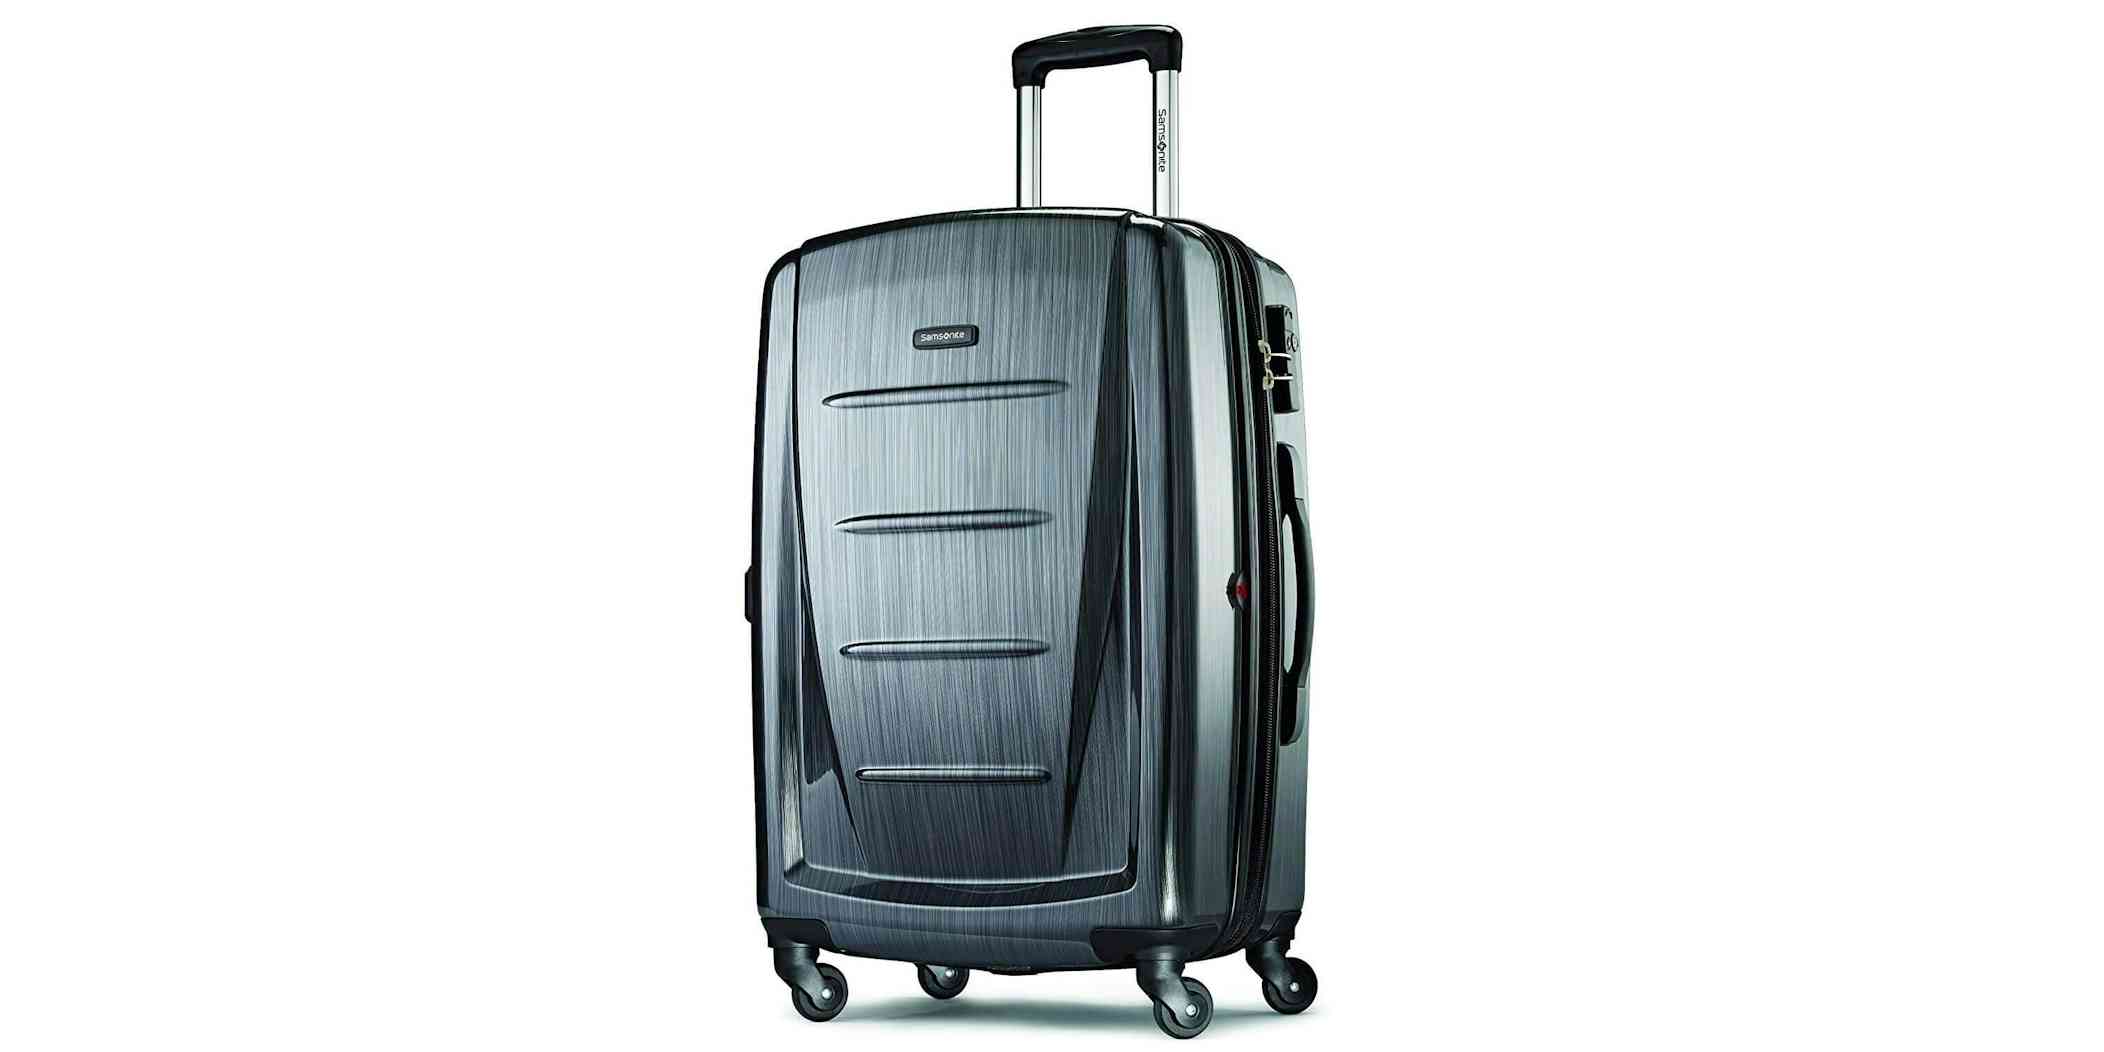 Best Luggage for Cruise Travel